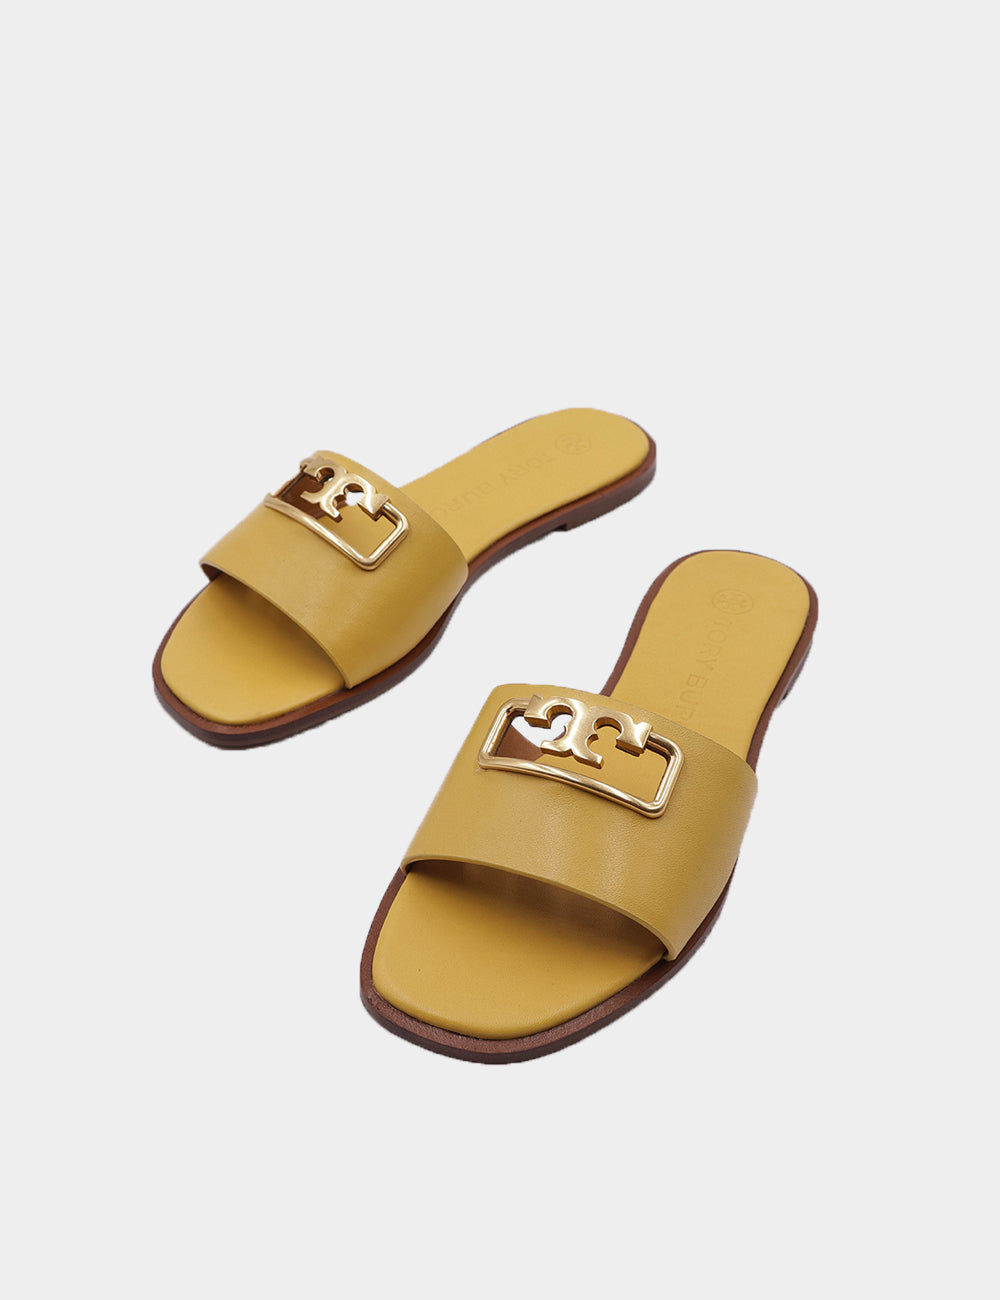 Tory Burch Selby Slide